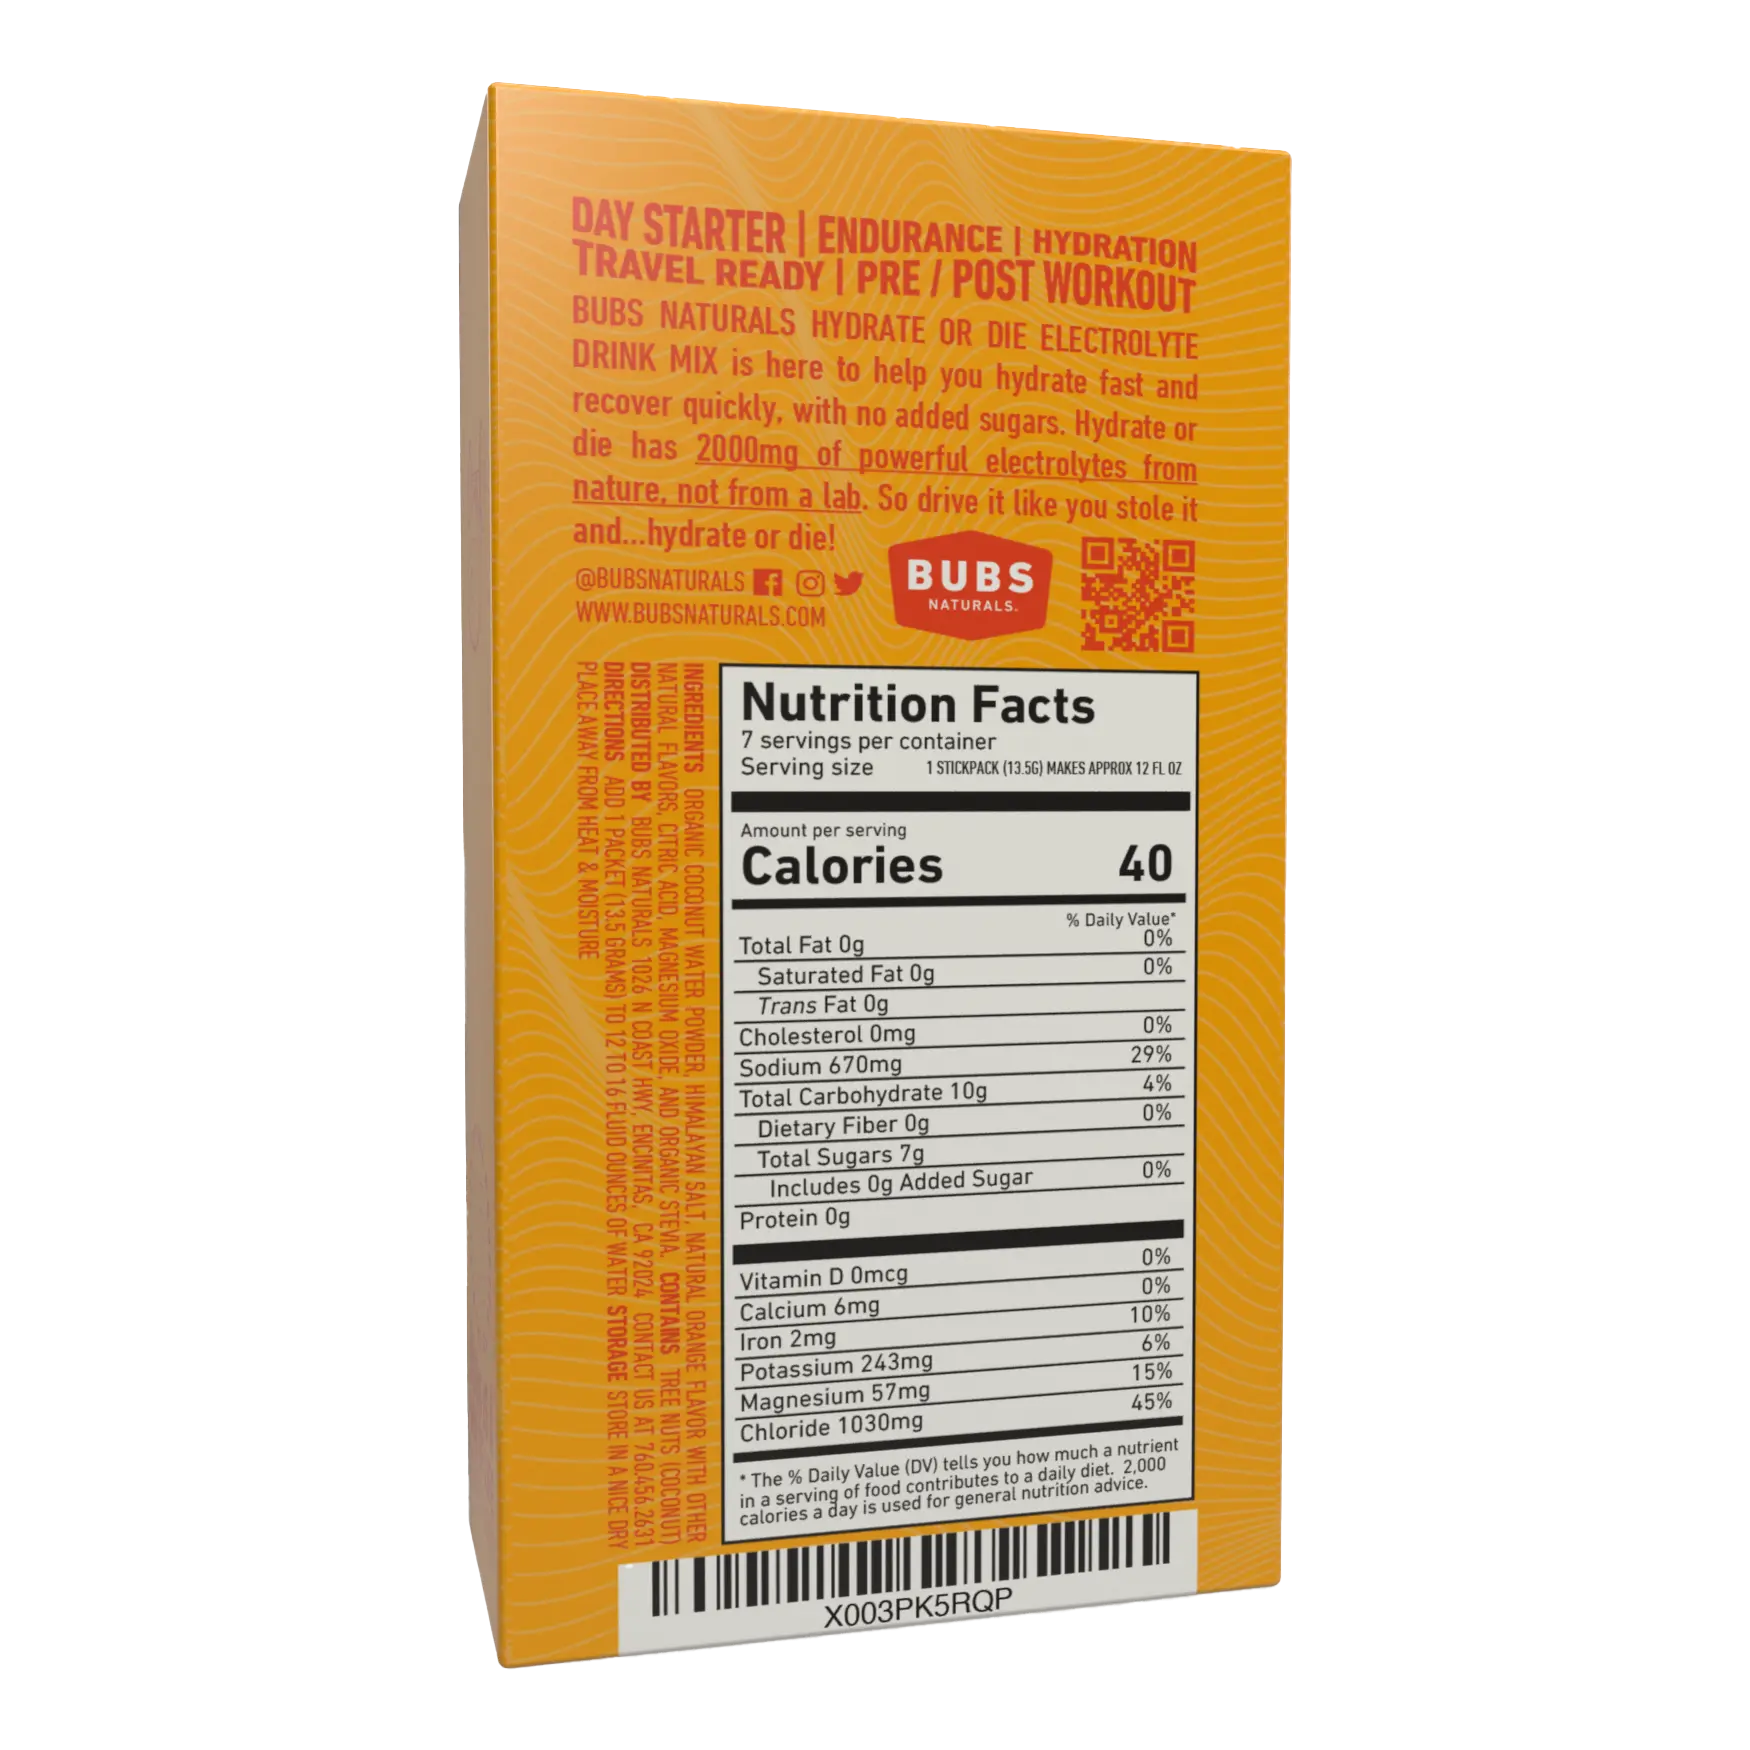 BUBS Naturals Hydrate or Die Electrolyte Cartons, Orange Back